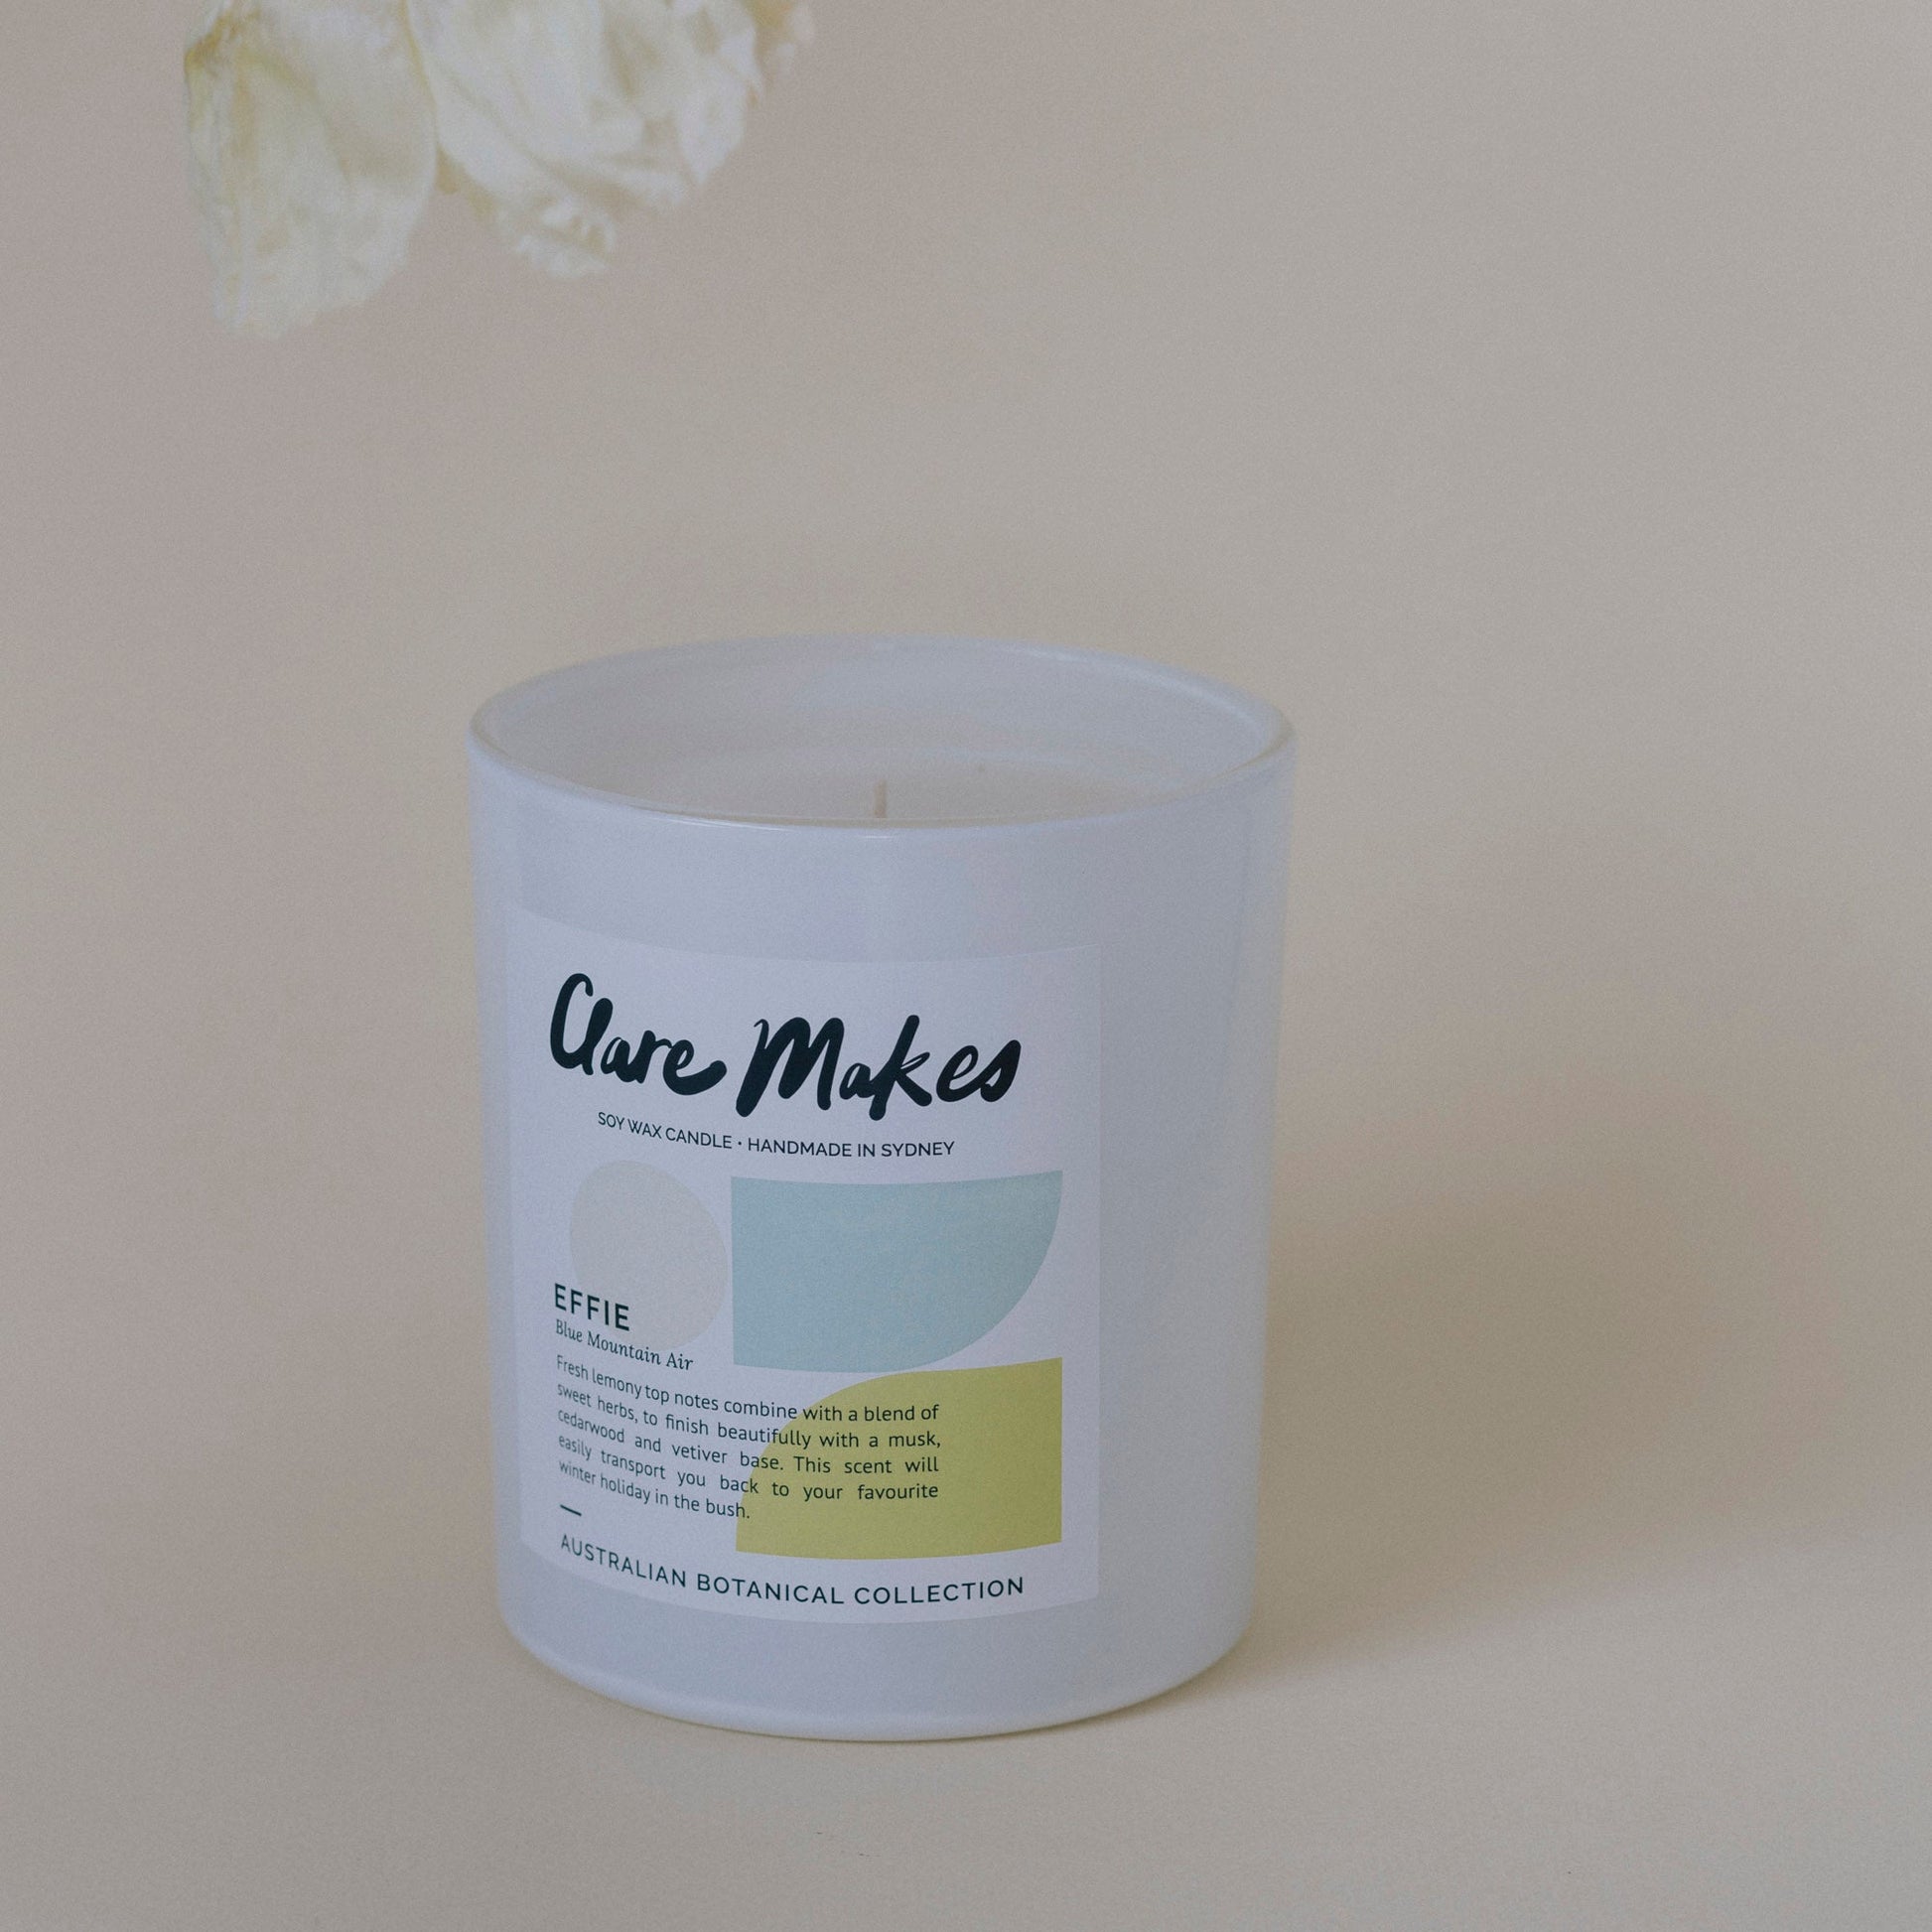 Effie: Blue Mountain Air - Clare Makes - Candle